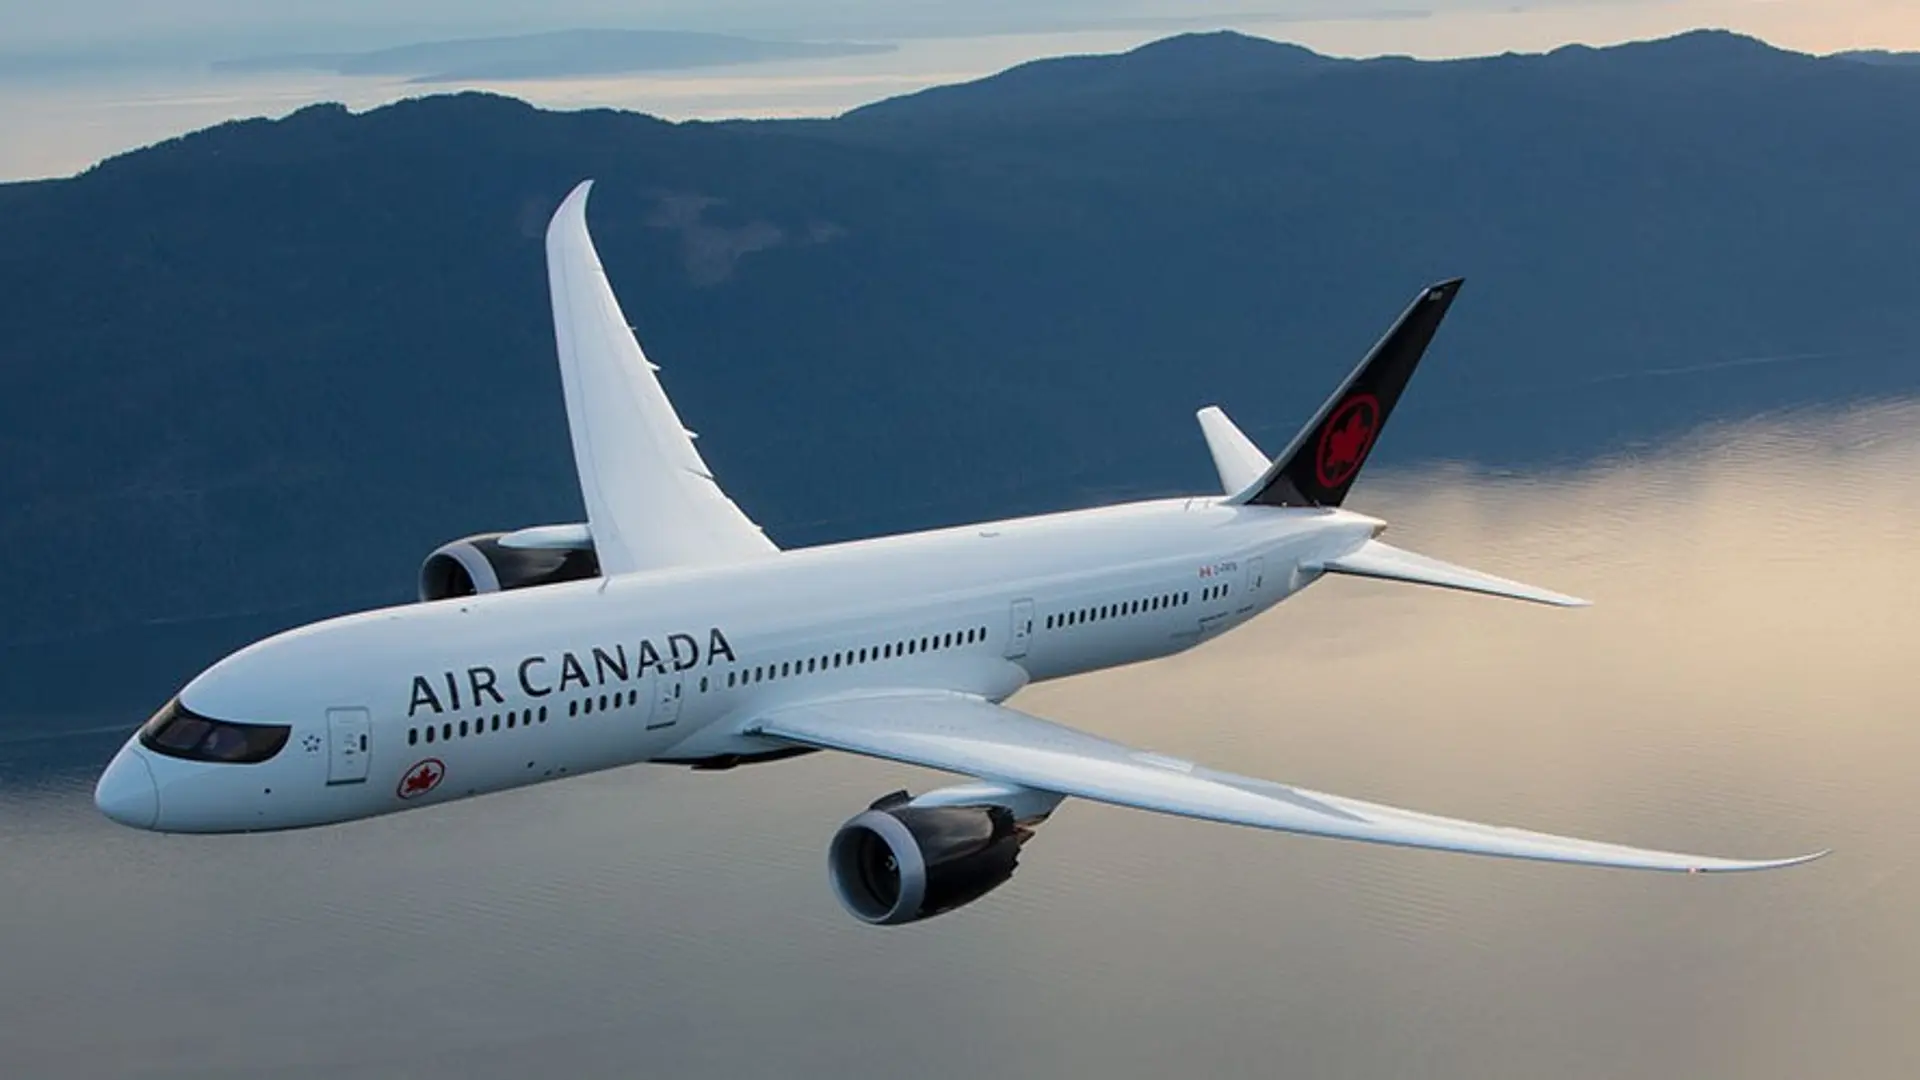 Air canada's plane in the sky